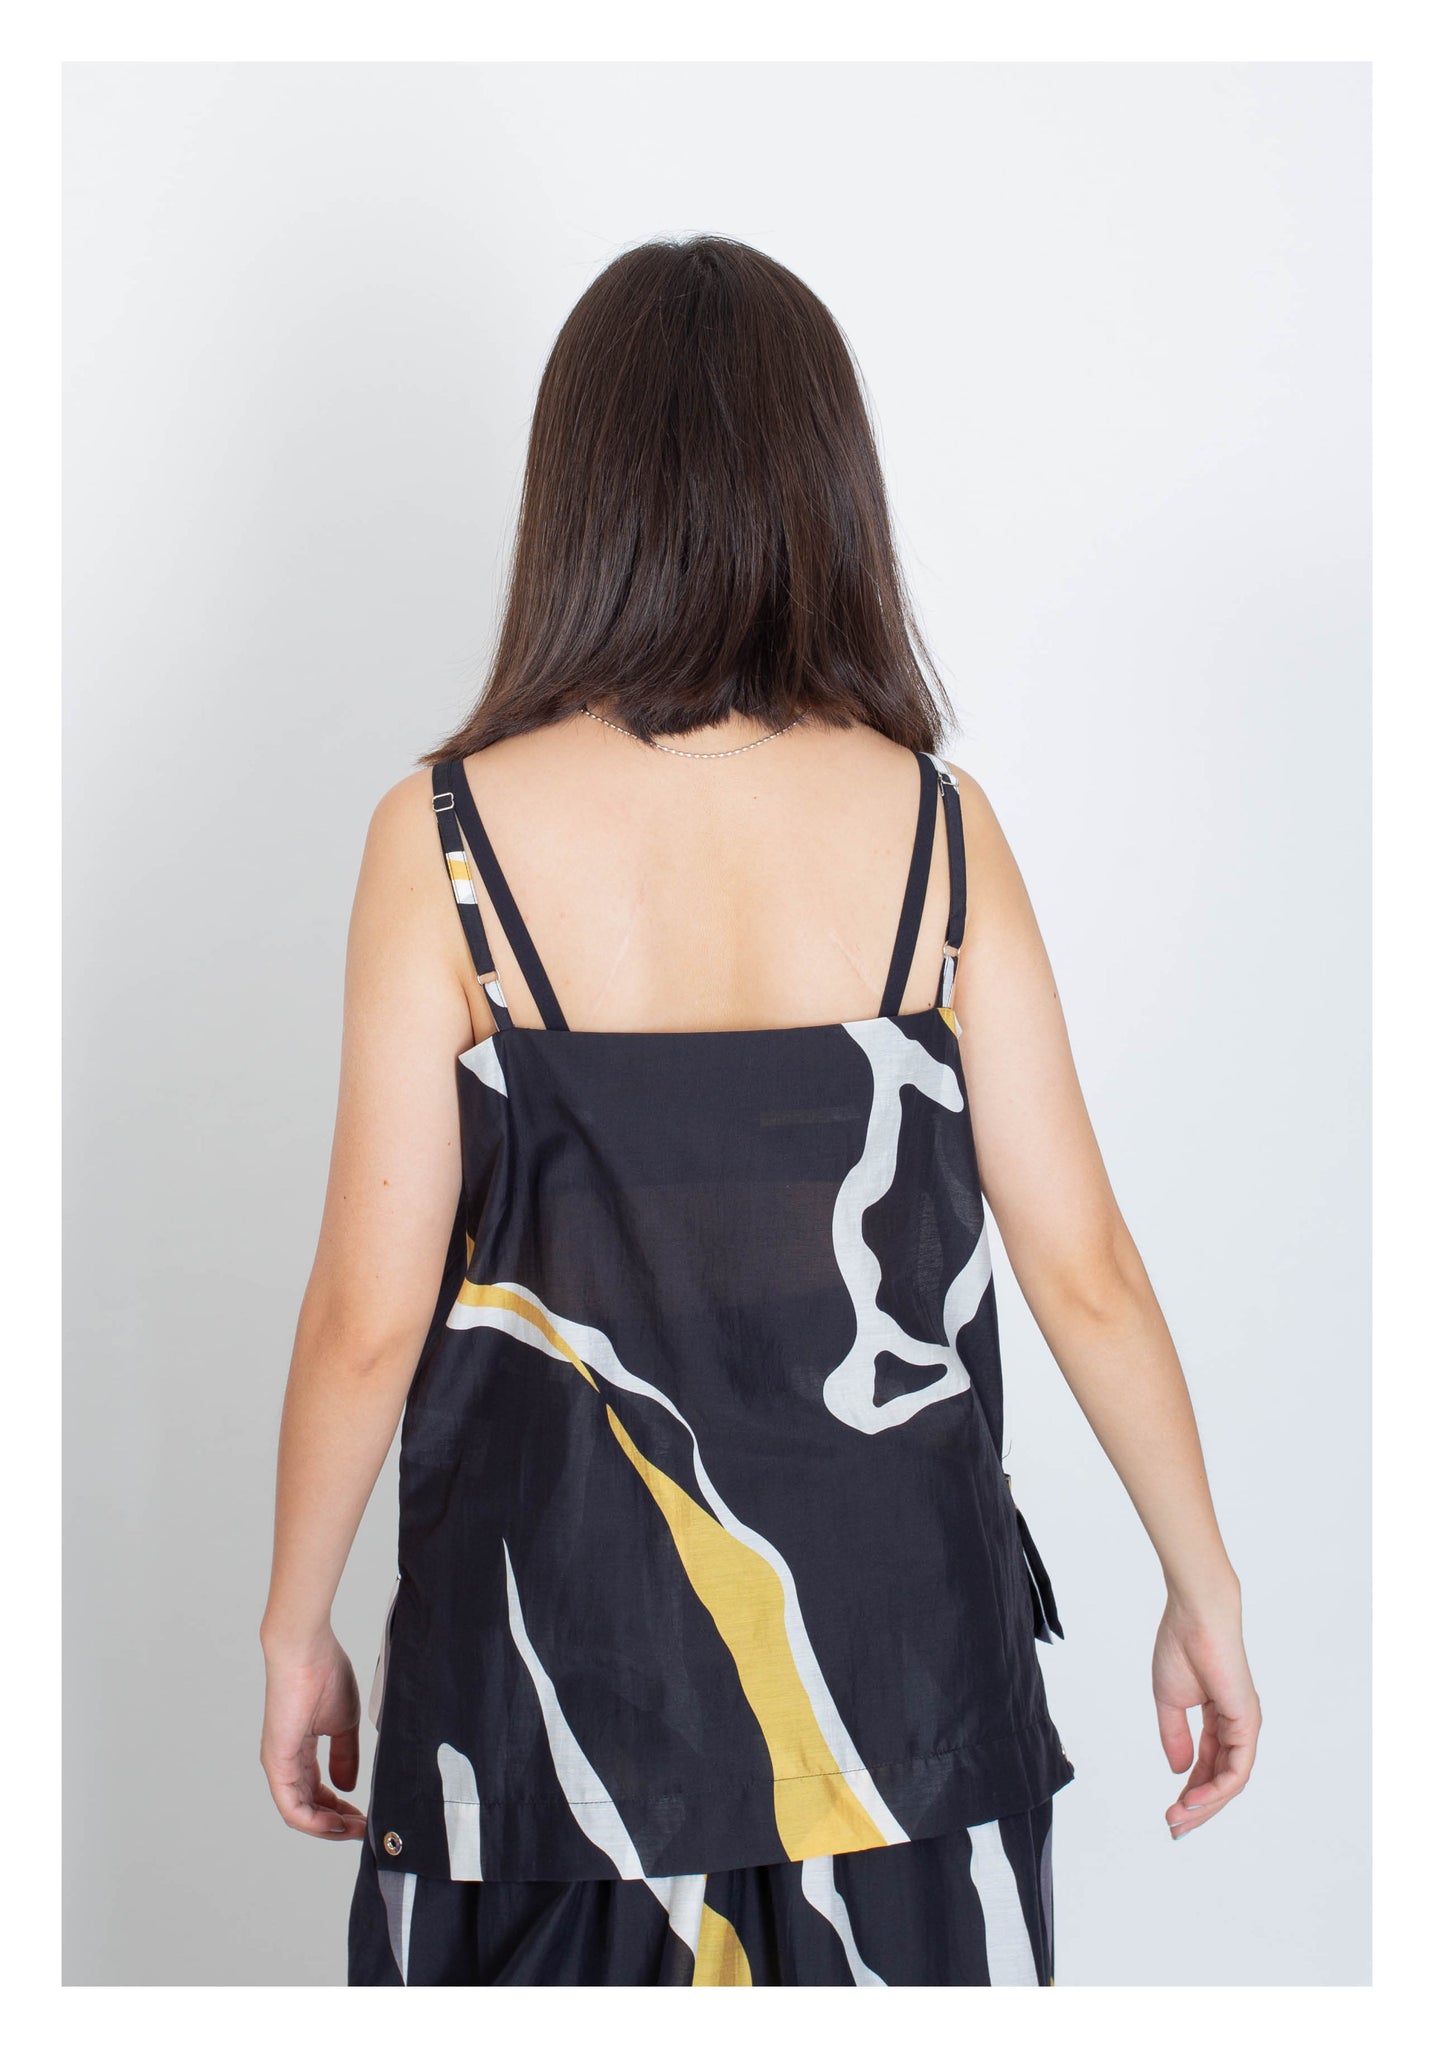 Abstract Pattern Ruffle Camisole - whoami